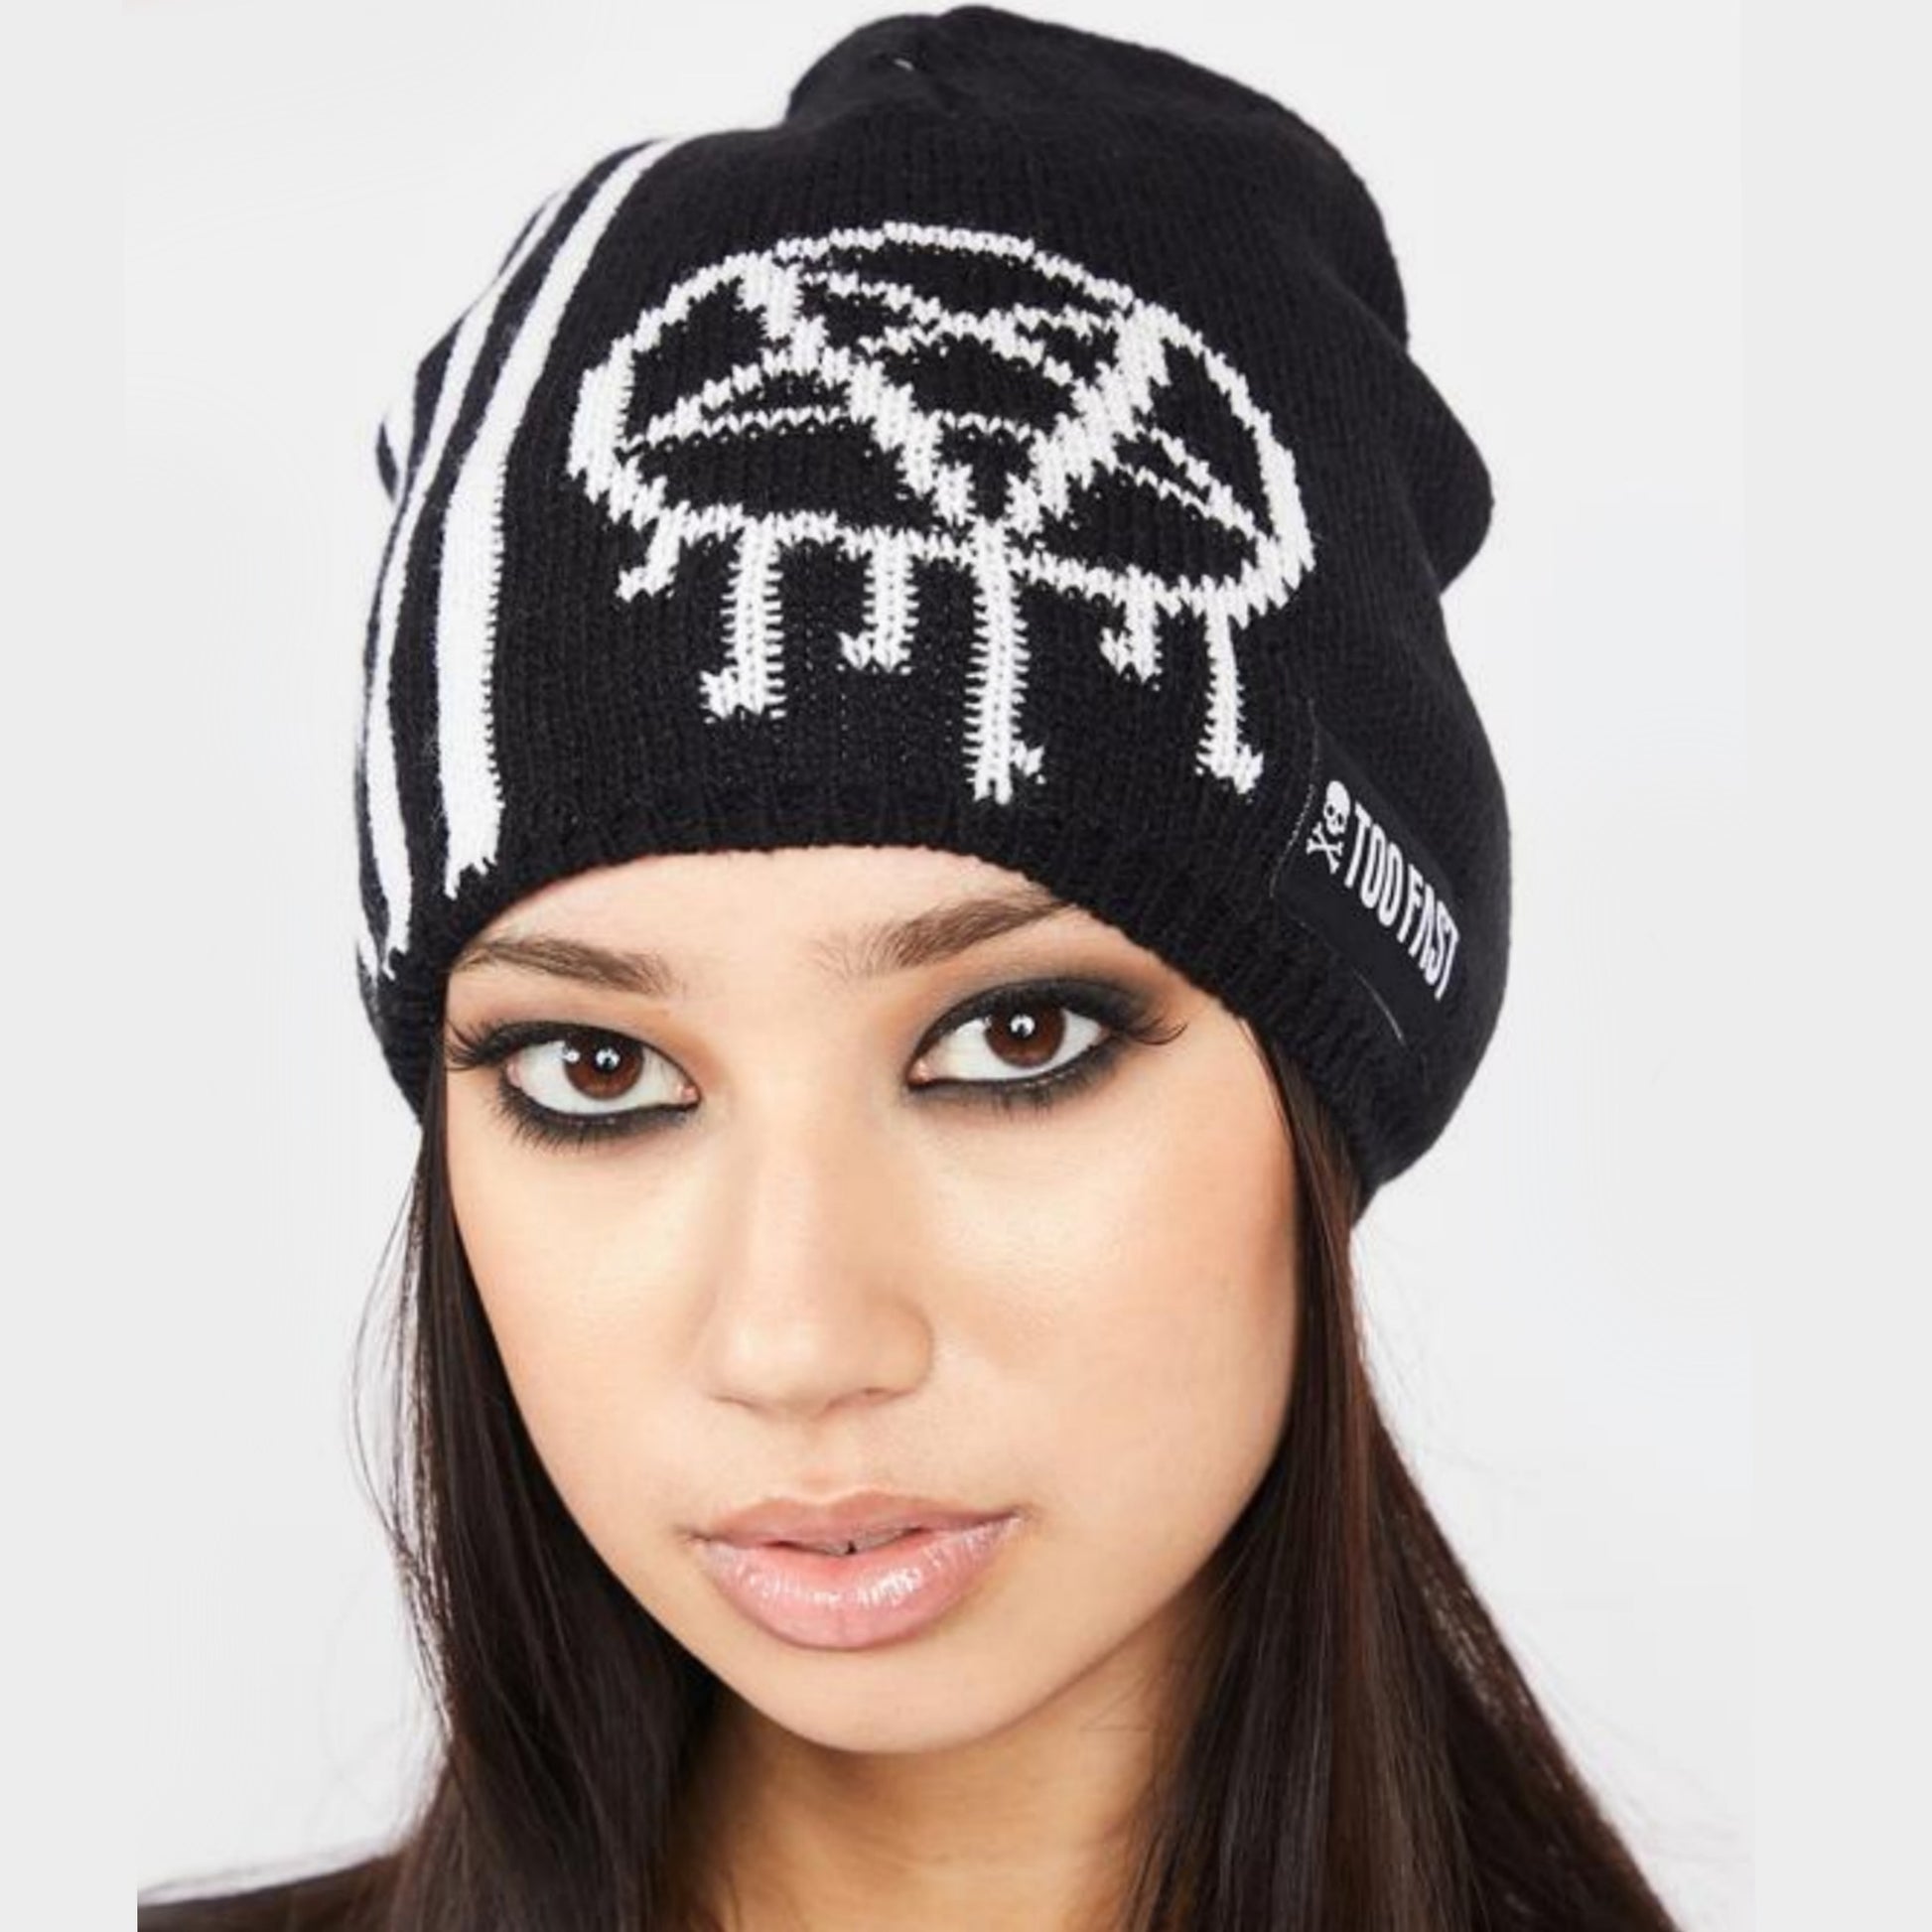 Stars and Stripes Beanie | Black Knit White Pentagram Graphic - Too Fast - Beanies